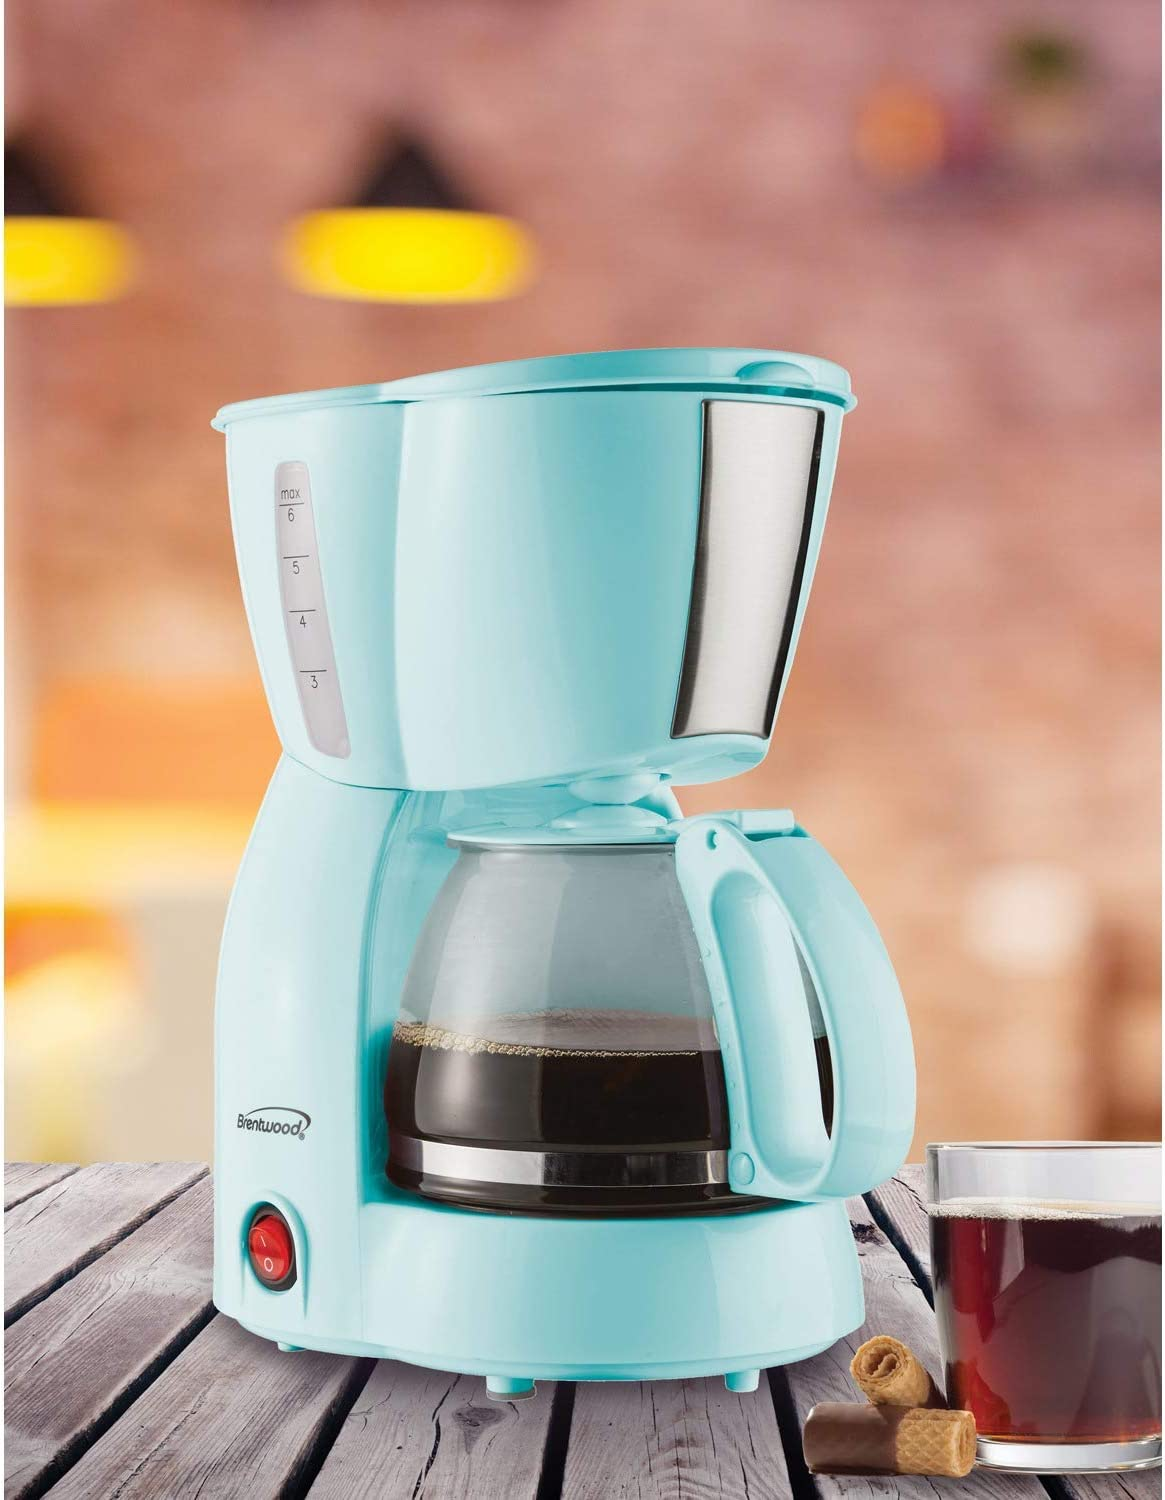 Brentwood TS-213BL 4 Cup Coffee Maker, Blue